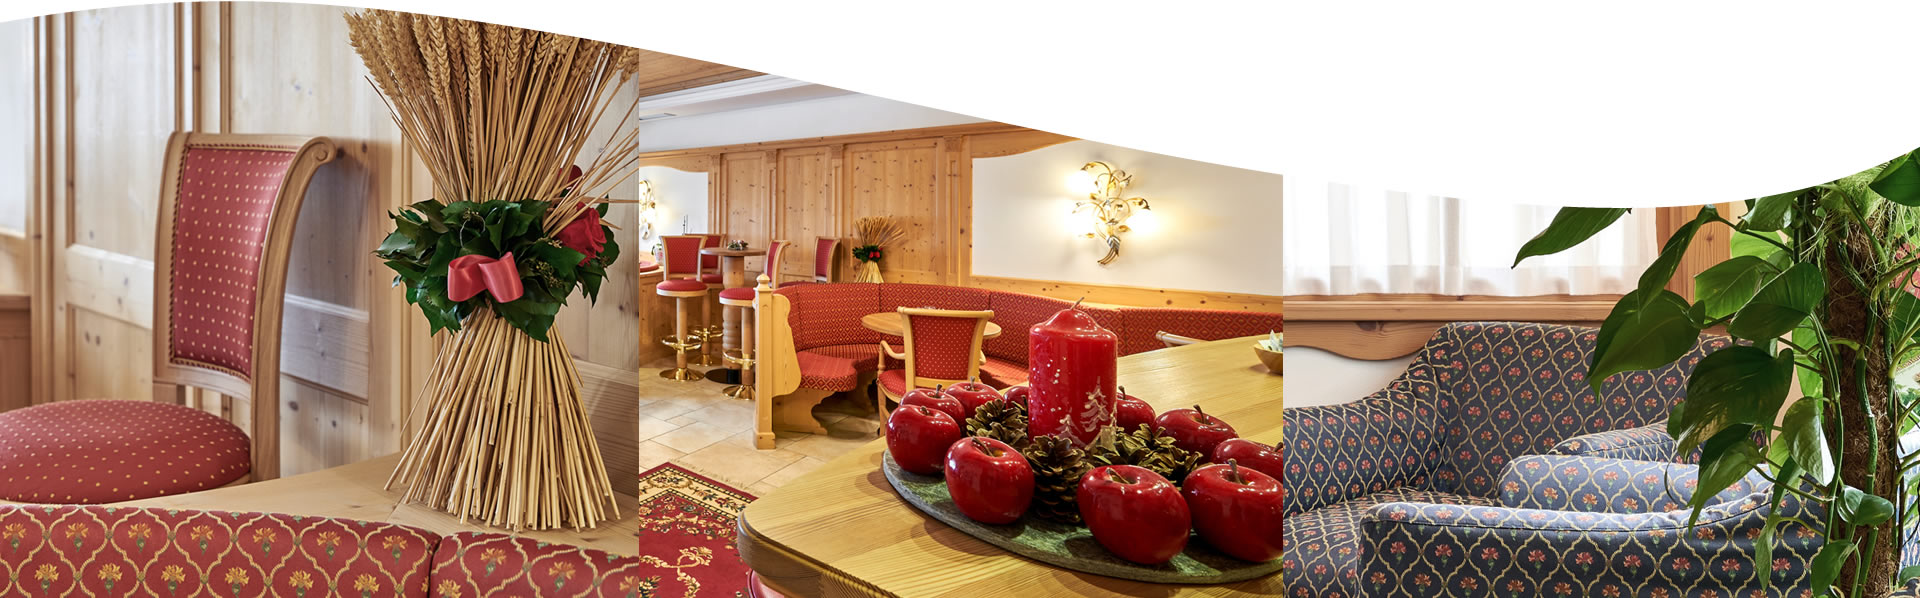 chalet campiglio imperiale